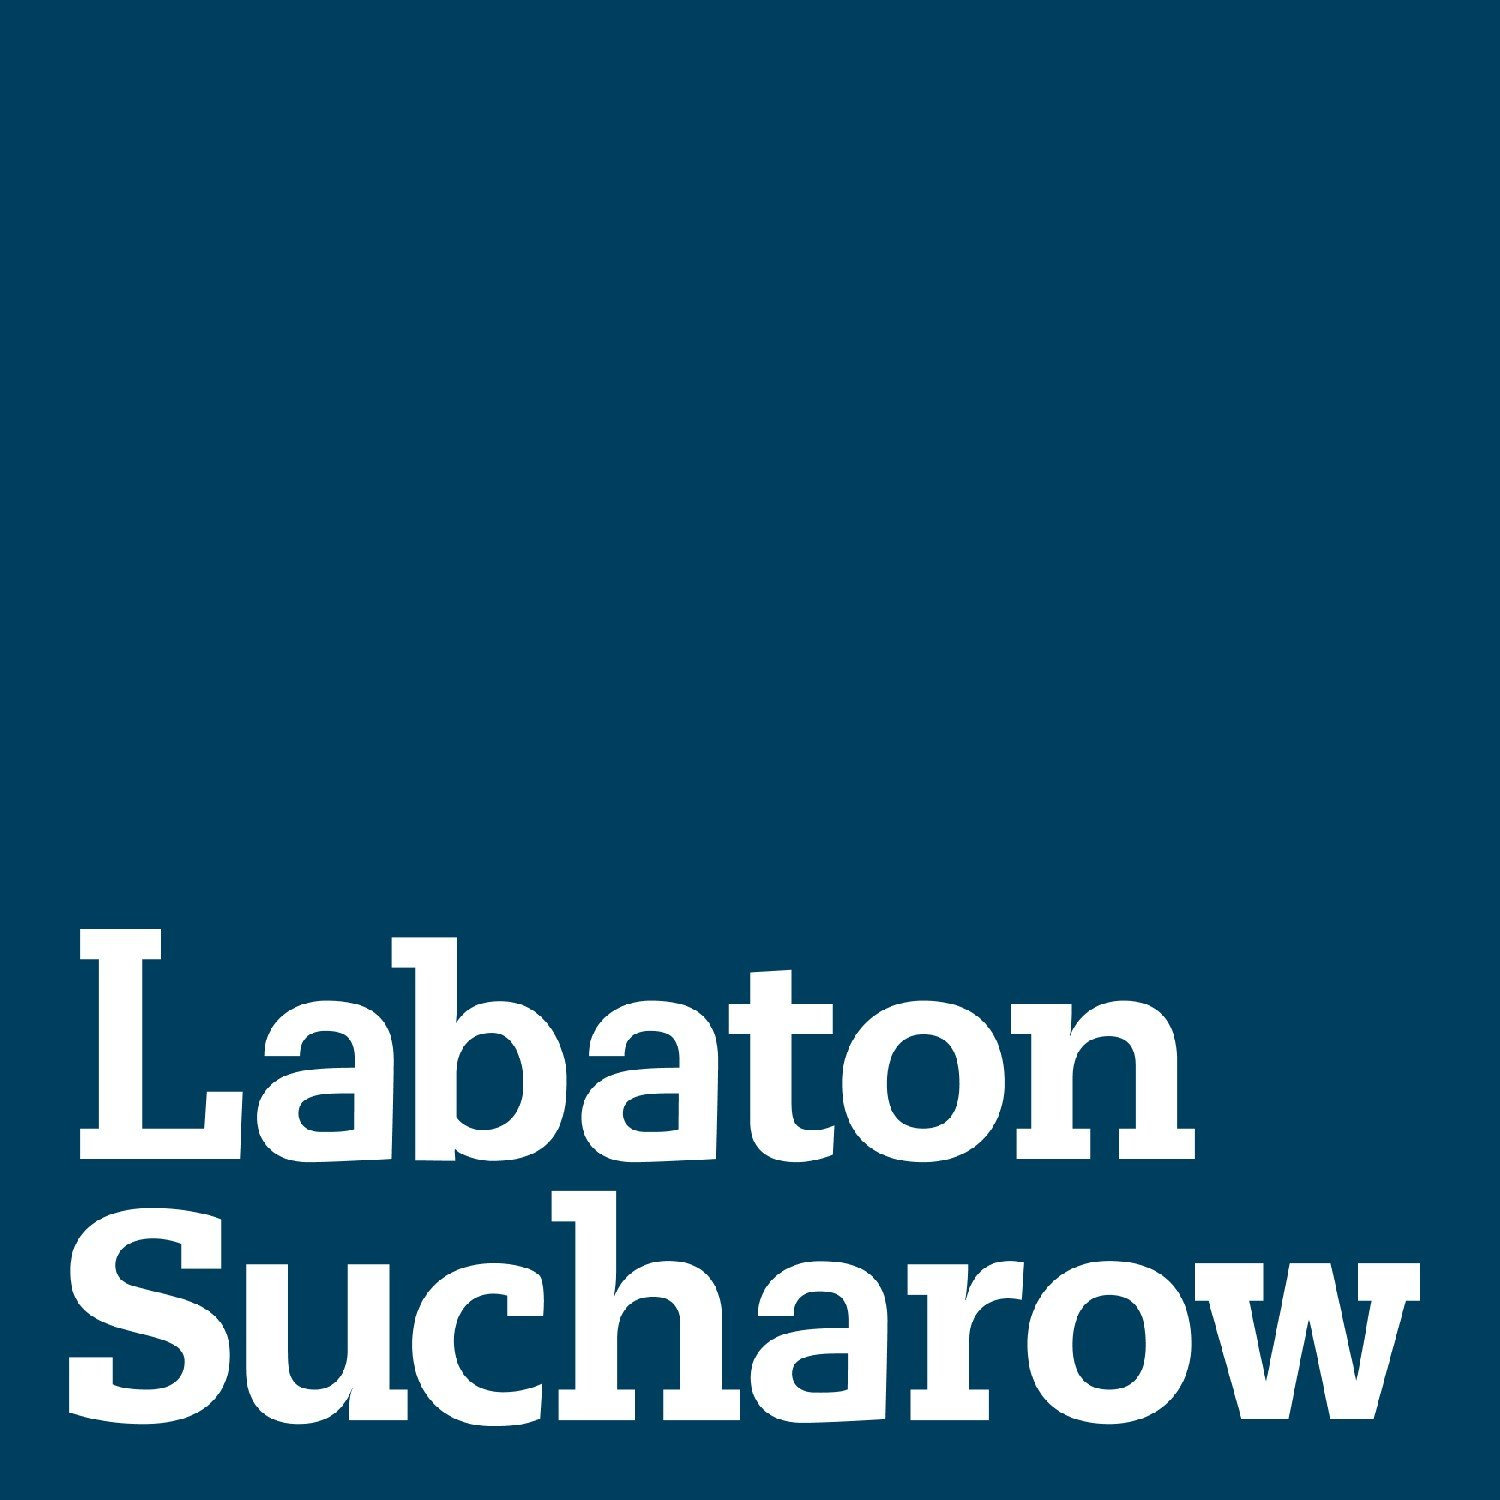 Labaton Sucharow LLP, Friday, May 7, 2021, Press release picture